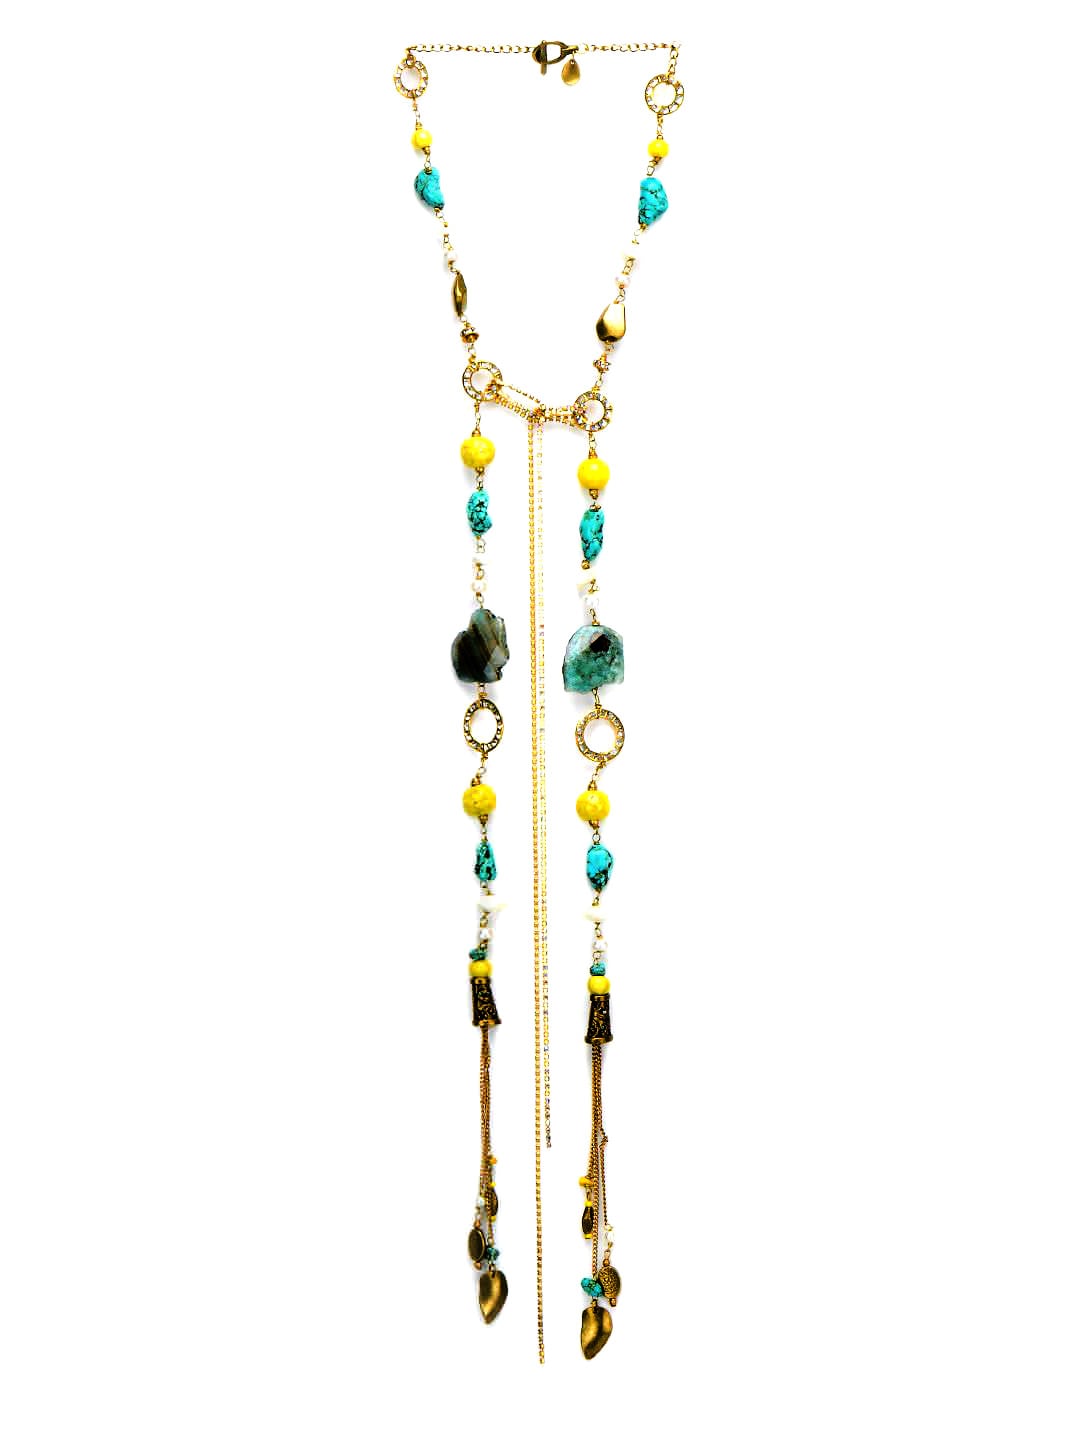 Ivory Tag Women Dazzling Agates Turquoise Blue and Yellow Necklace